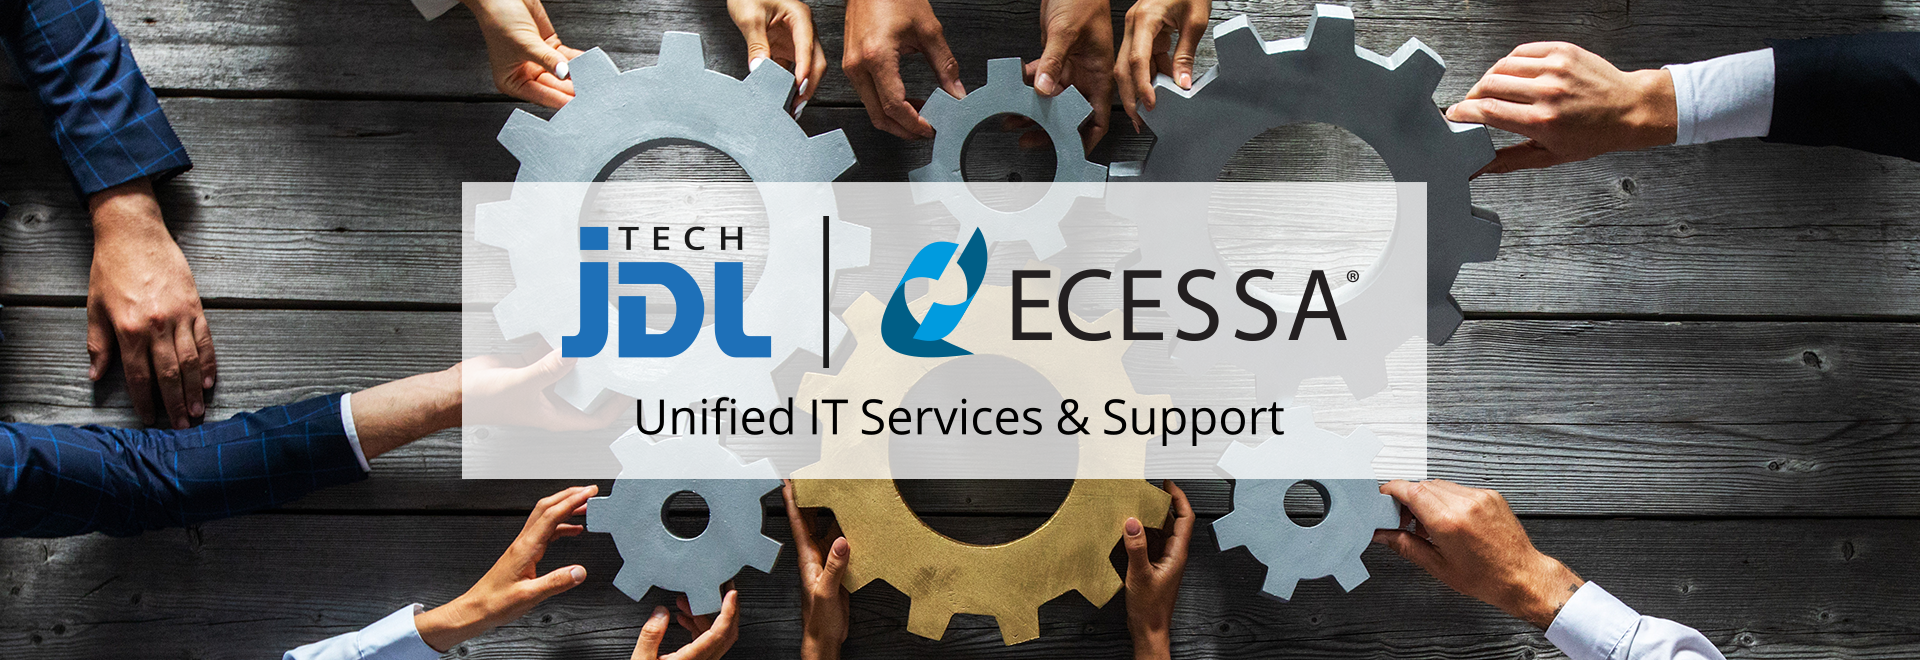 IT Services by Ecessa and JDL Tech